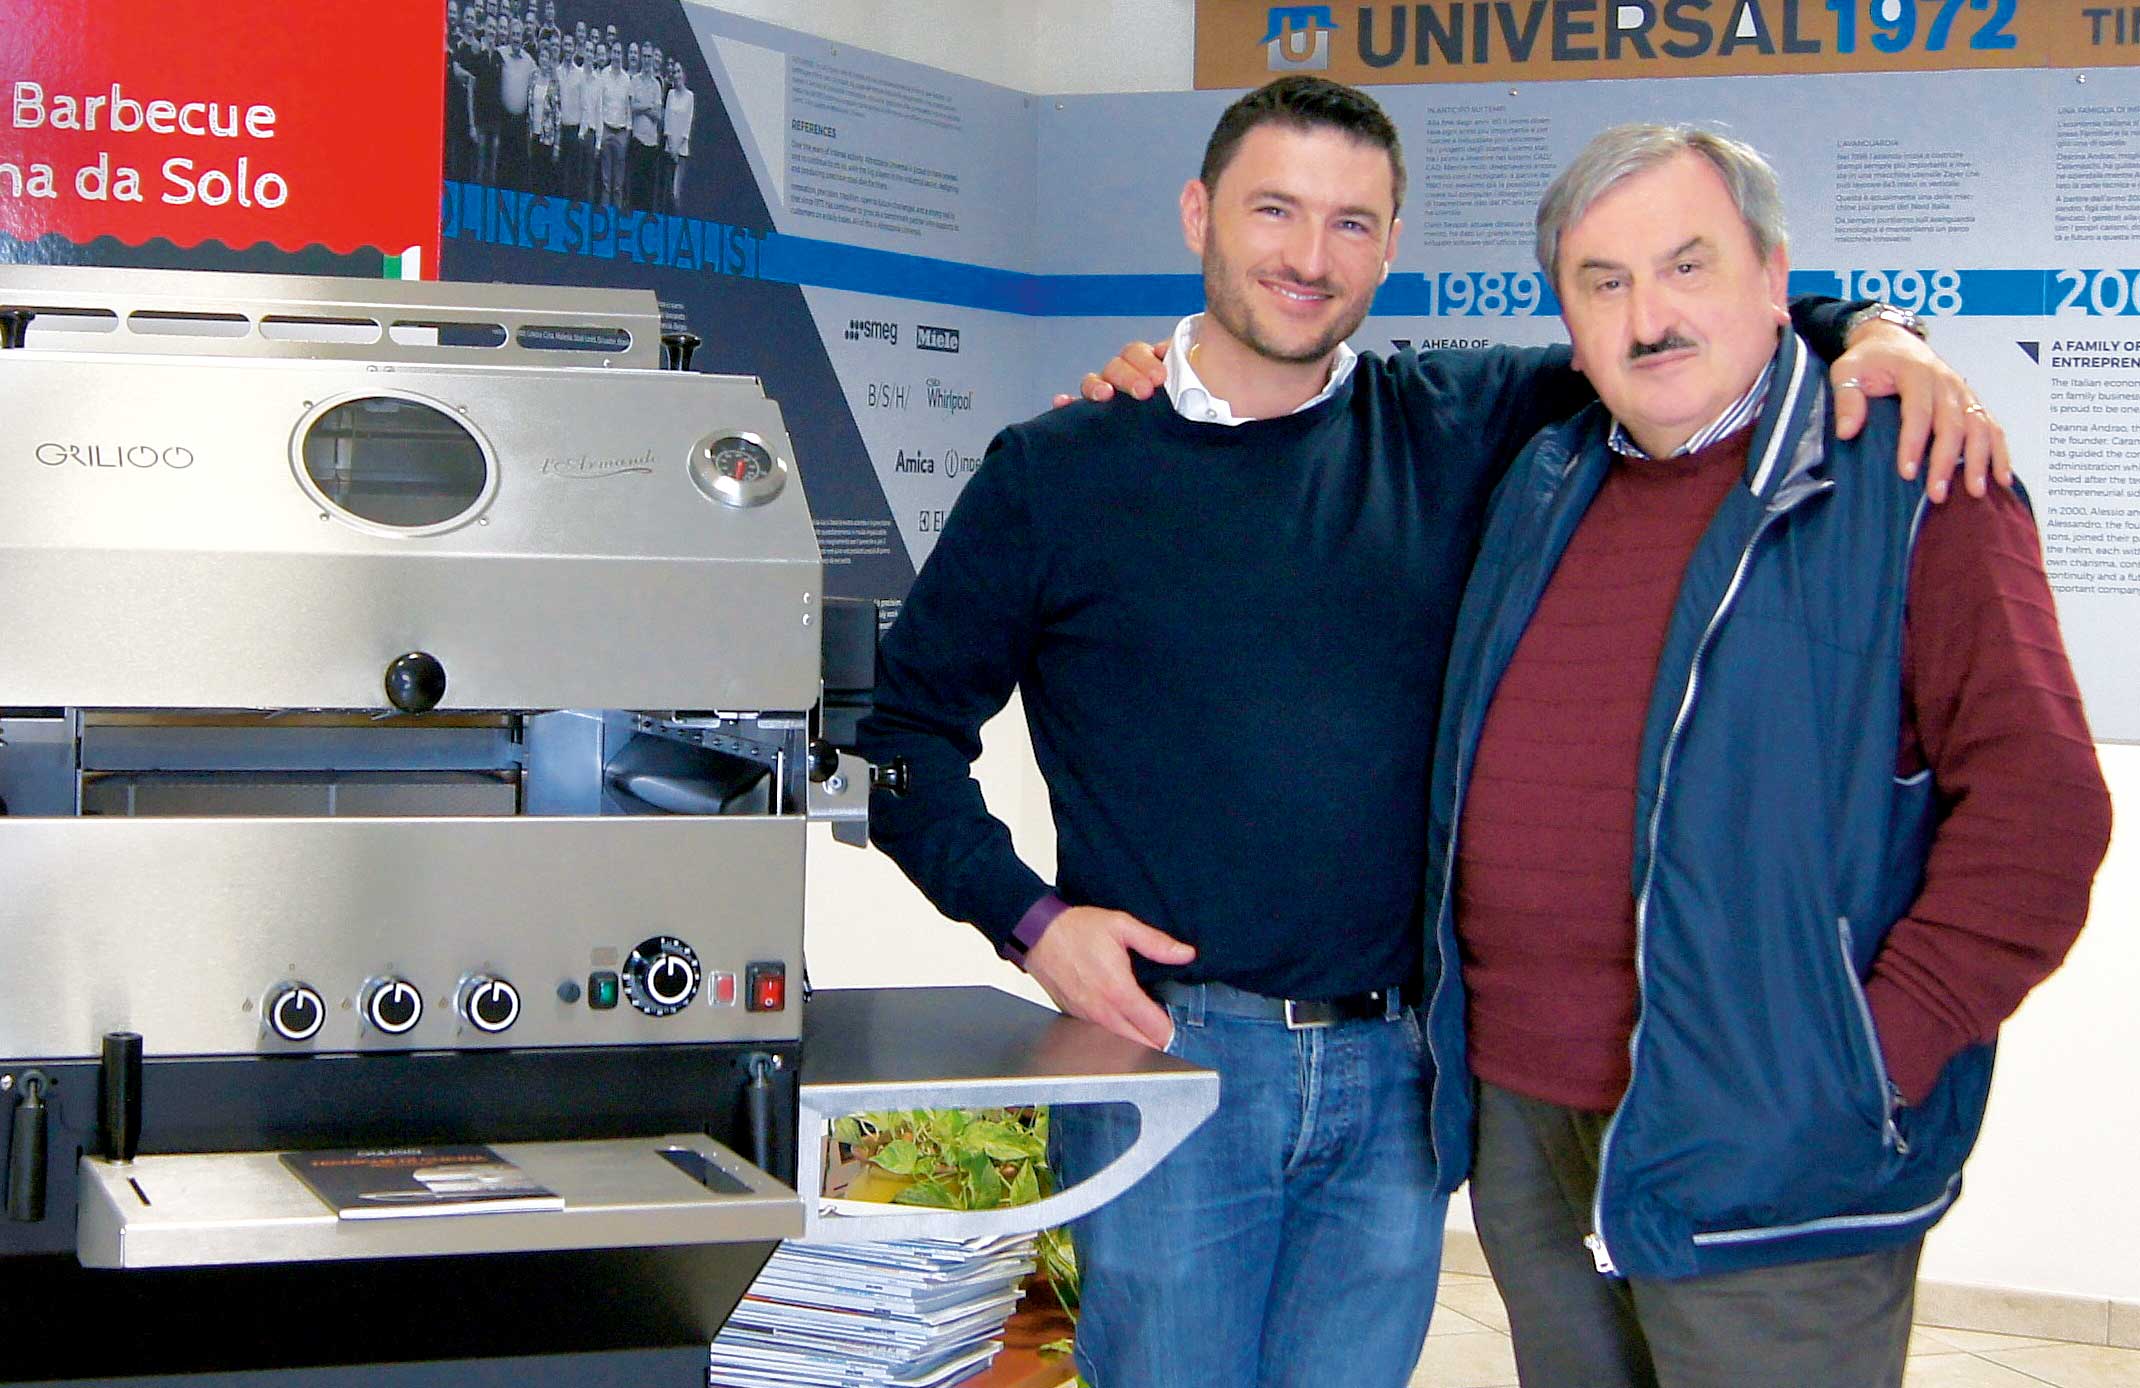 From the left: Alessio and Armando Caramaschi, two generations at Universal1972. They are both ­convinced that investment in new equipment is capable of boosting efficiency and stimulating a company’s growth.